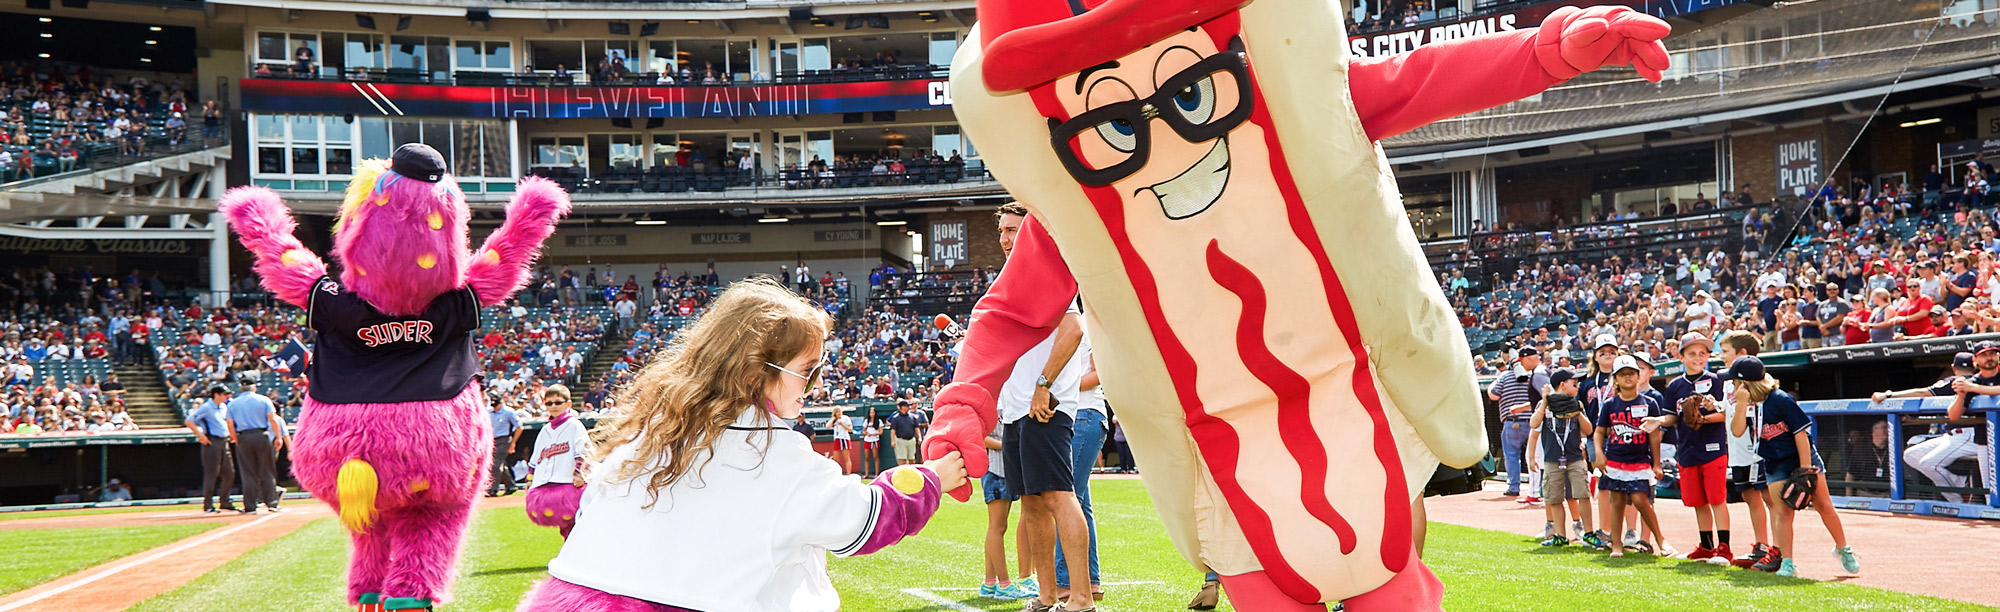 Cleveland Indian's hot dog fight with each other